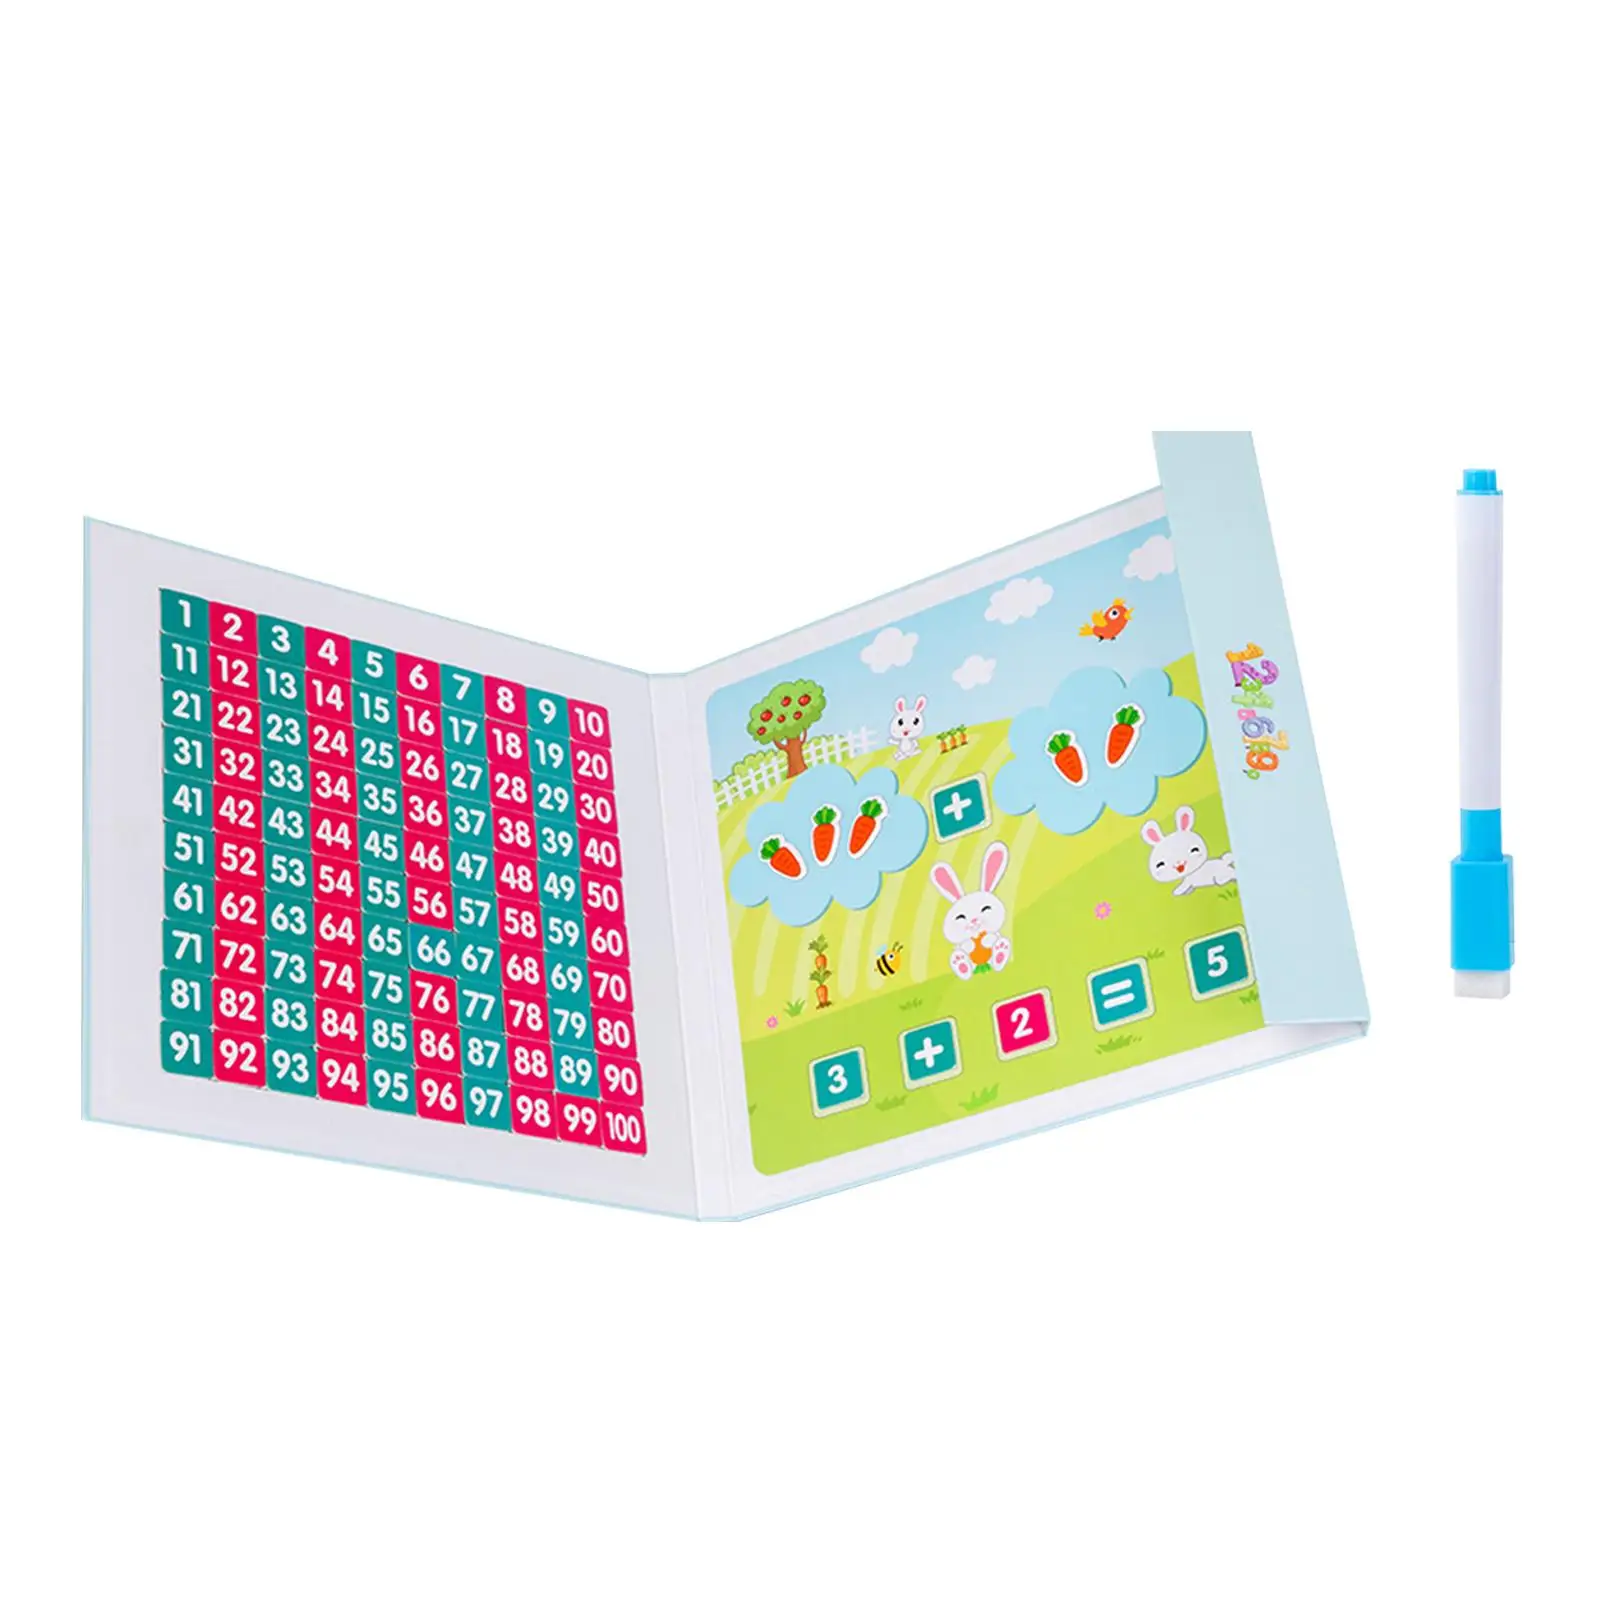 Hundred Number Board Set Educational Toys Math Teacher Aids Math Counting Hundred Board Toy for Kindergarten Home Preschool Kids